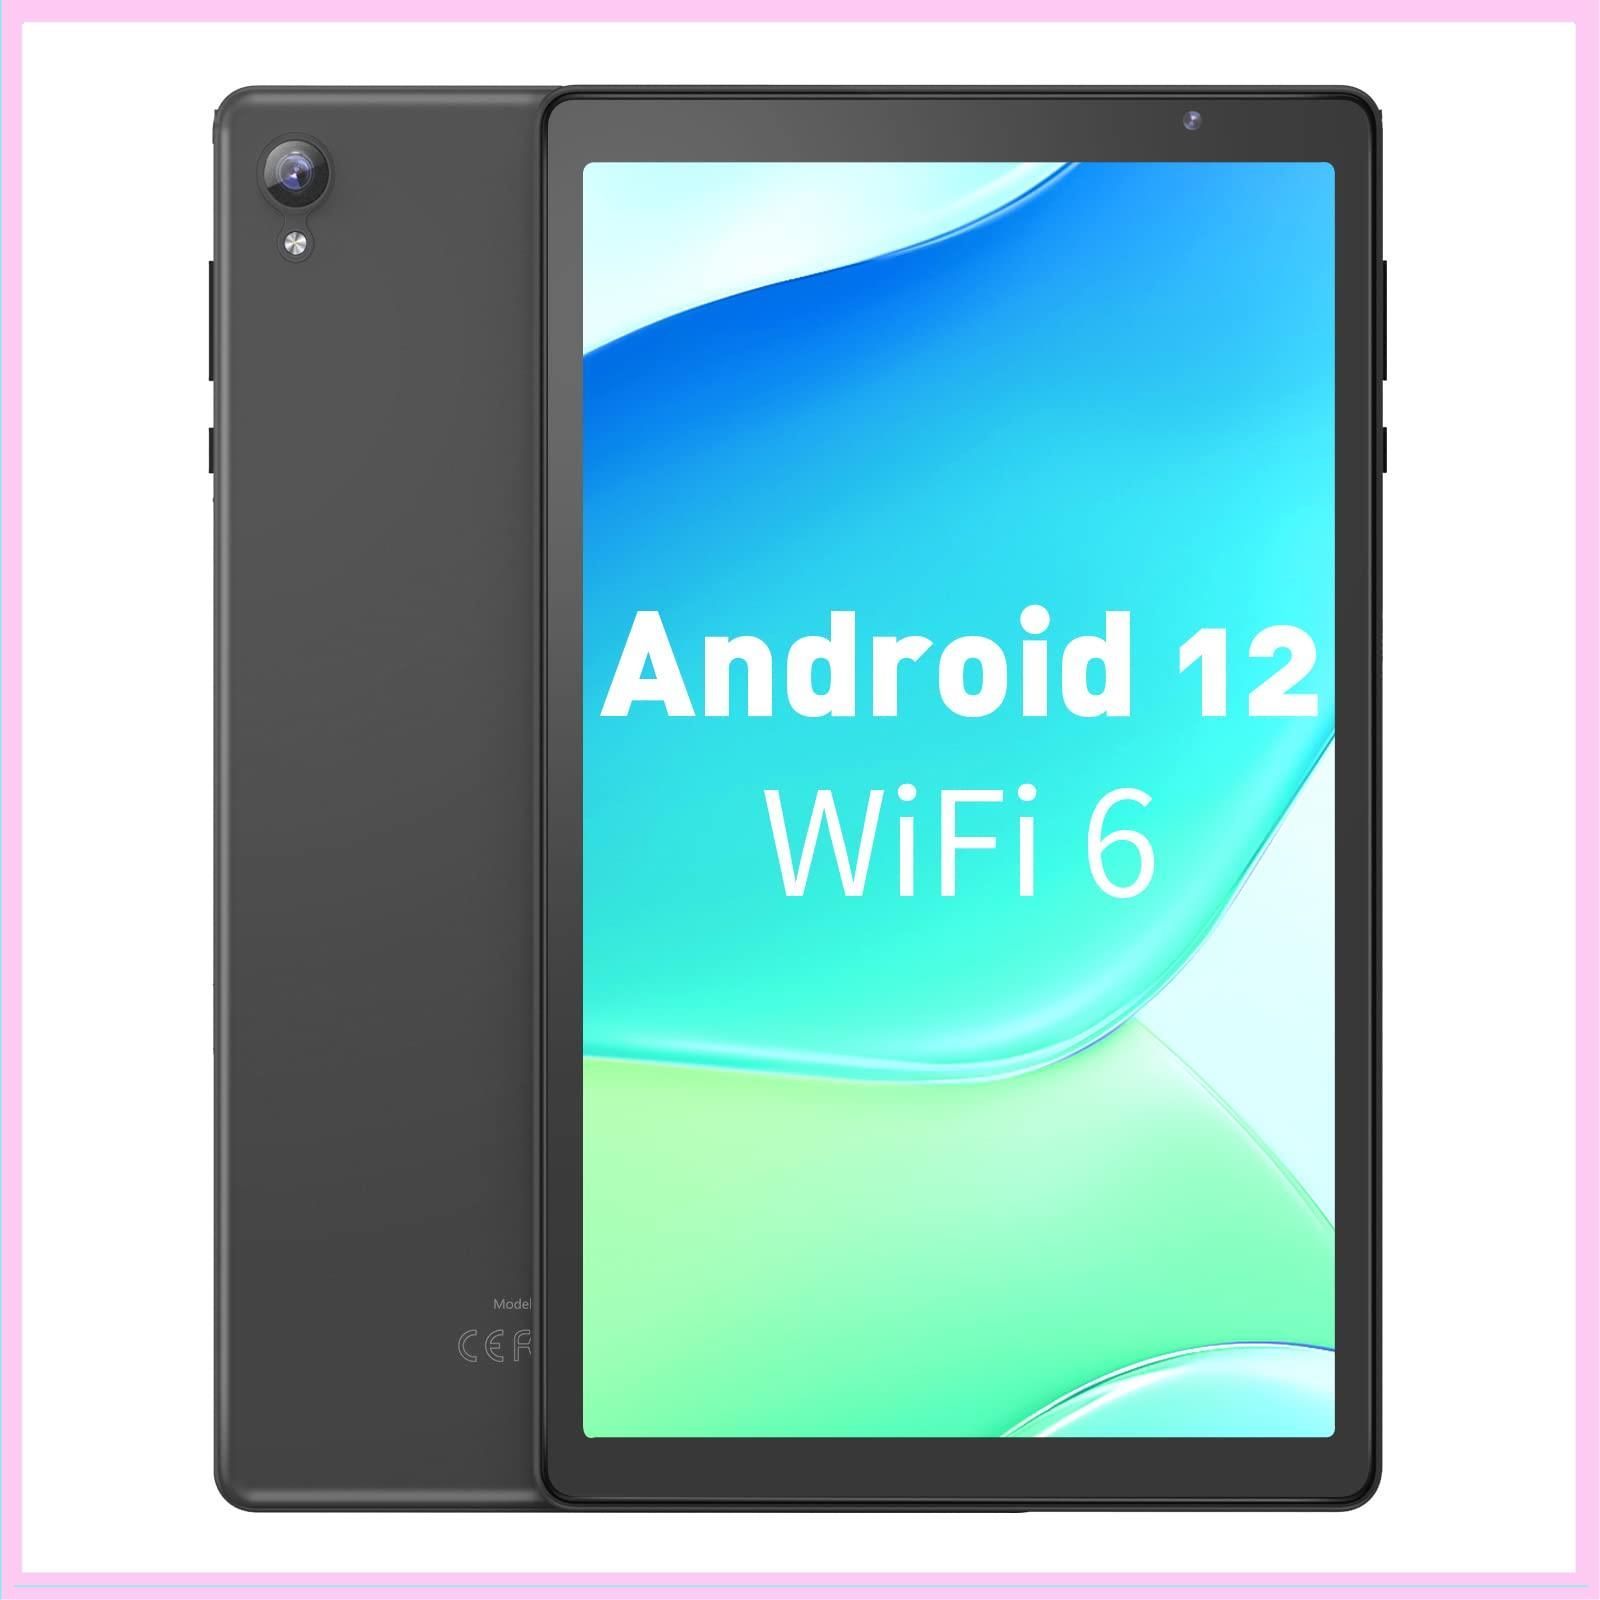 Android 12 タブレット 10インチ wi-fiモデル タブレット